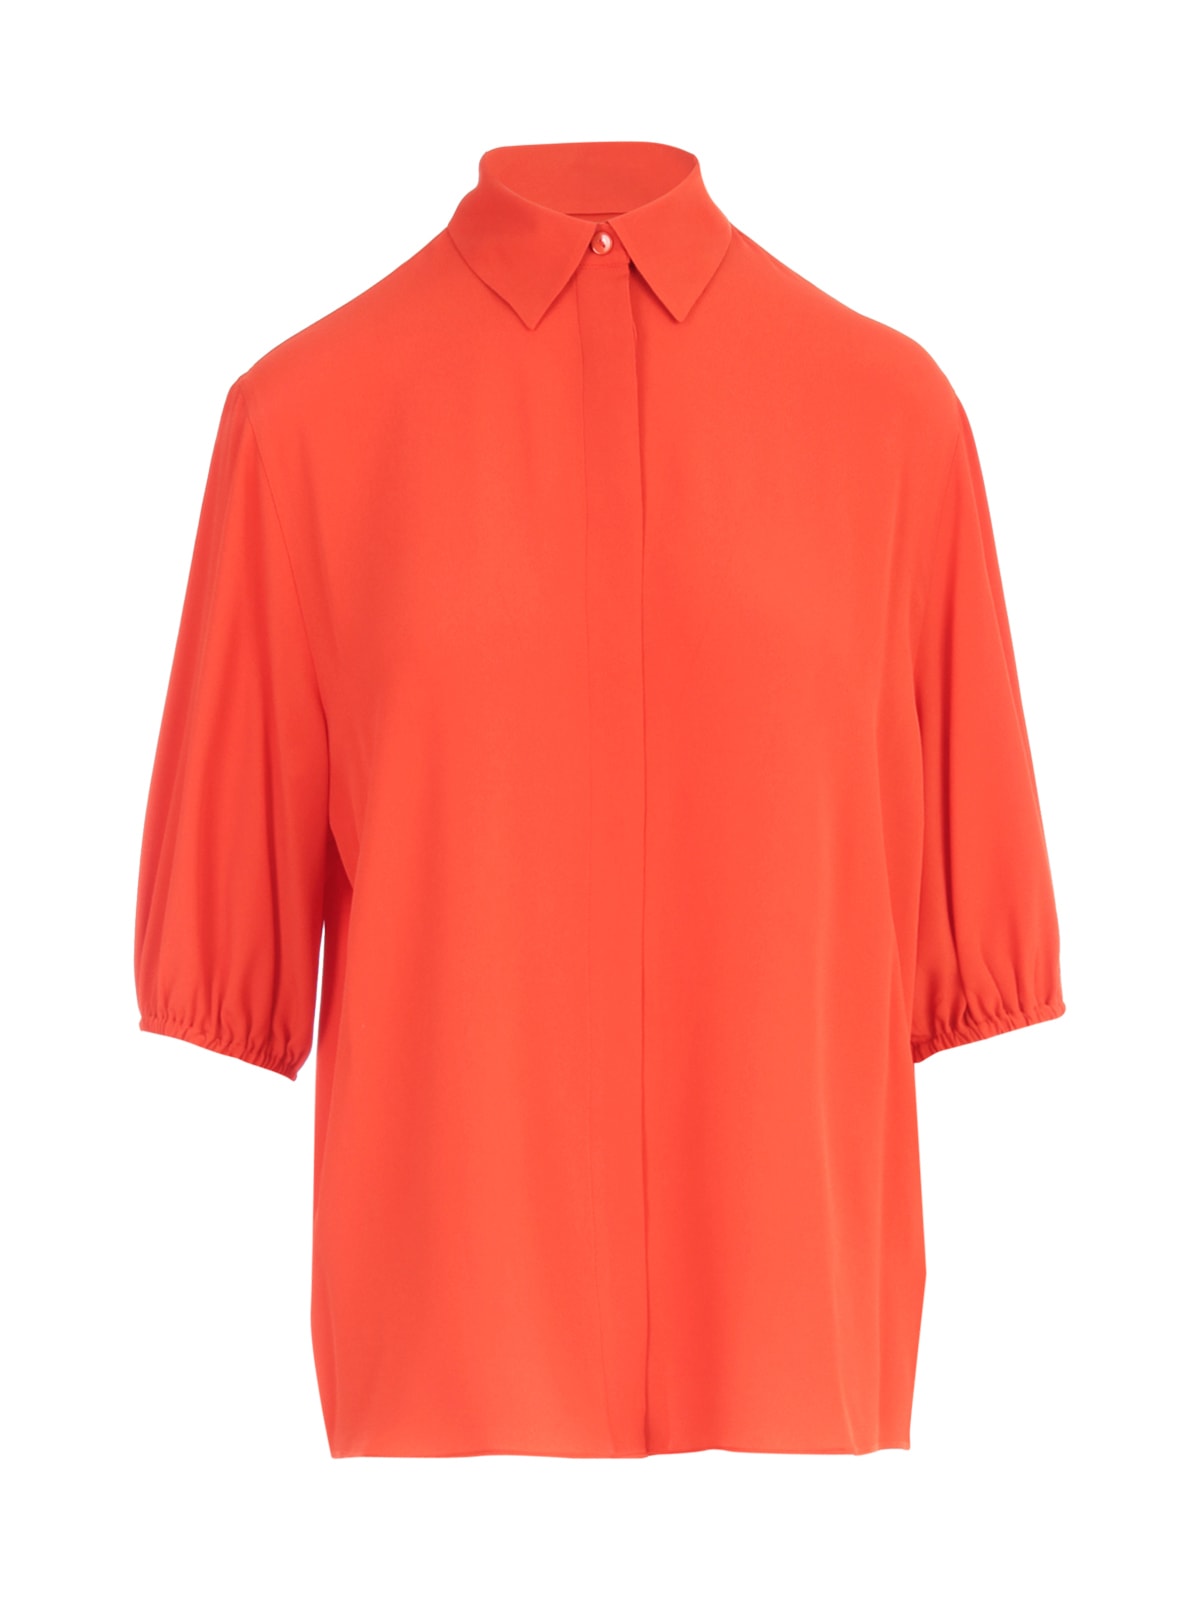 PS by Paul Smith Oversized 3/4s Shirt